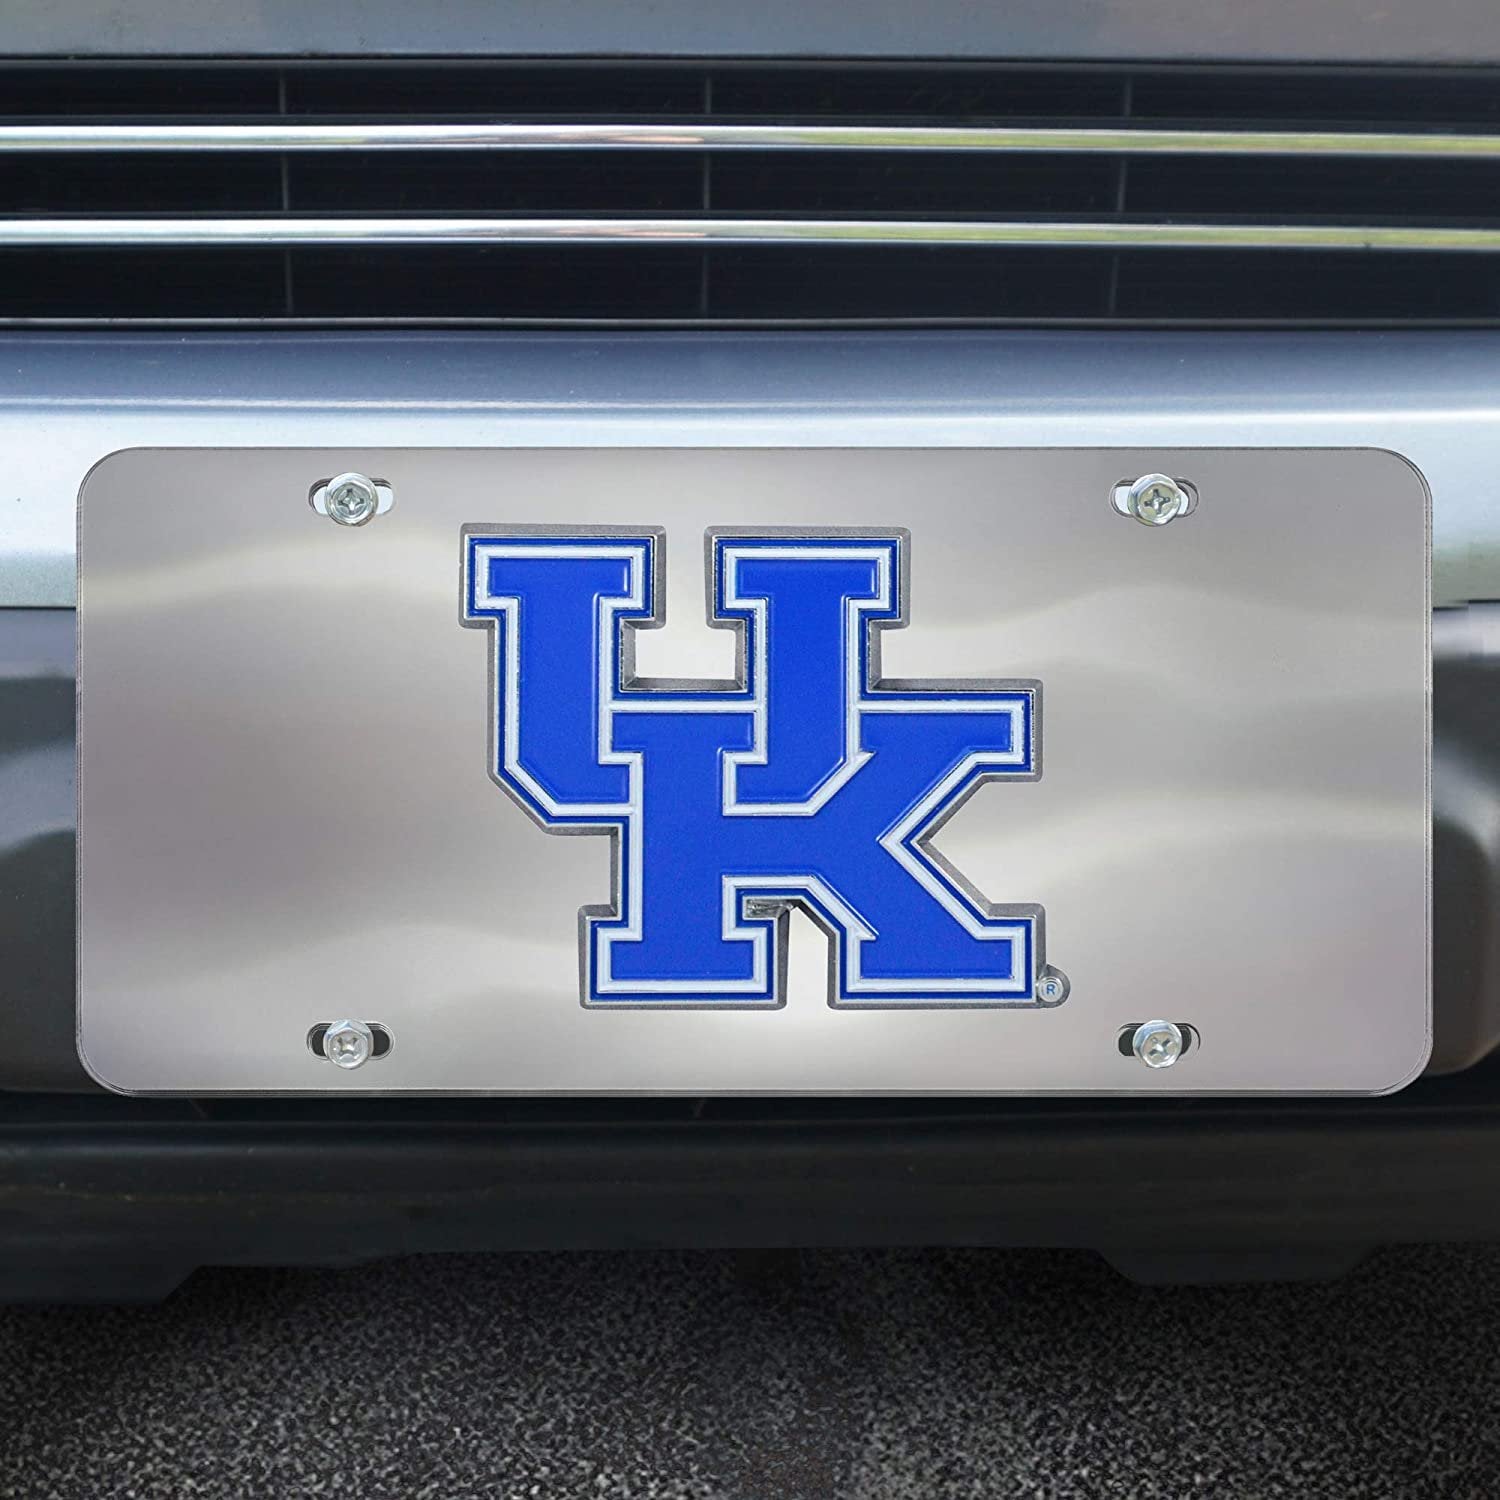 University of Kentucky Wildcats License Plate Tag, Premium Stainless Steel Diecast, Chrome, Raised Solid Metal Color Emblem, 6x12 Inch